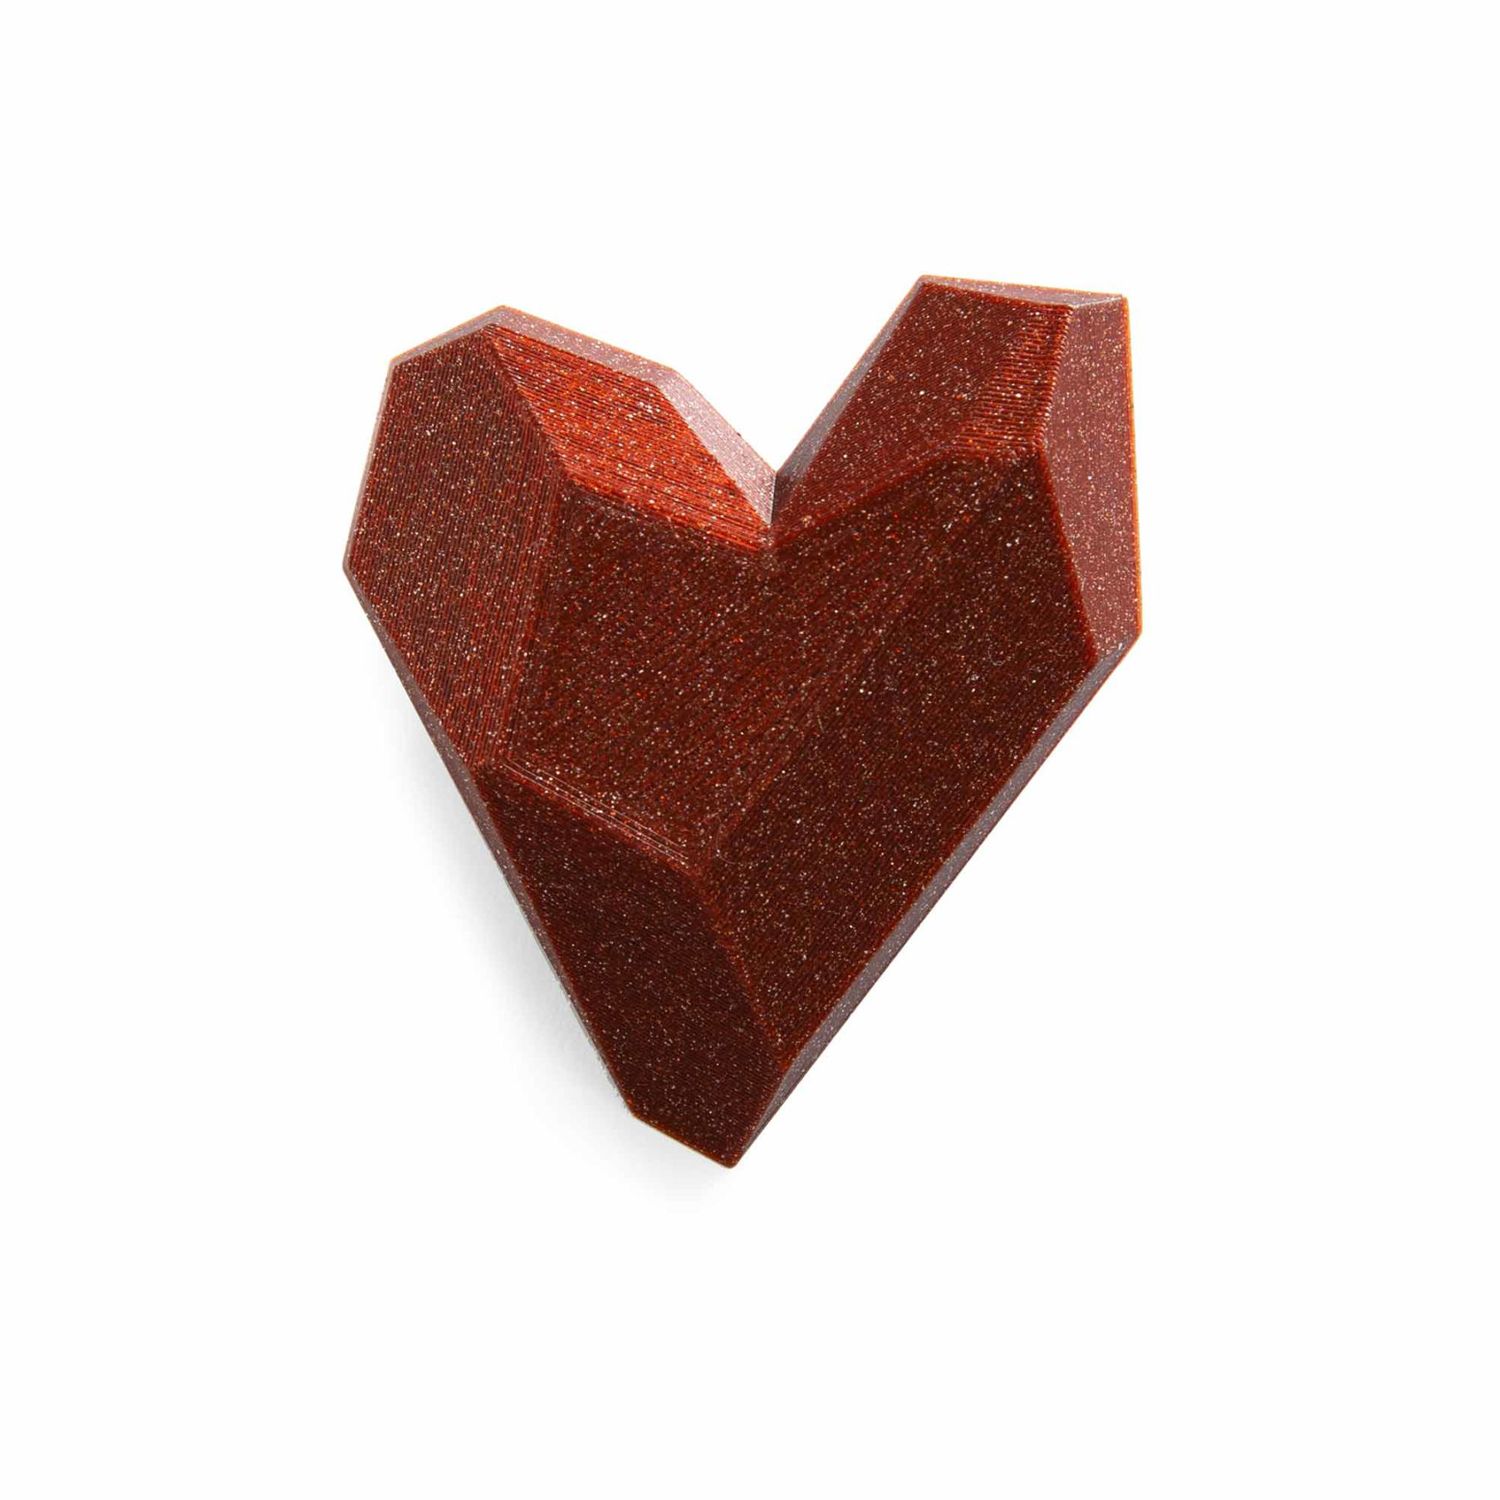 Maison 203: Mini Heart Brooch – Red Glitter Product Image 1 of 3